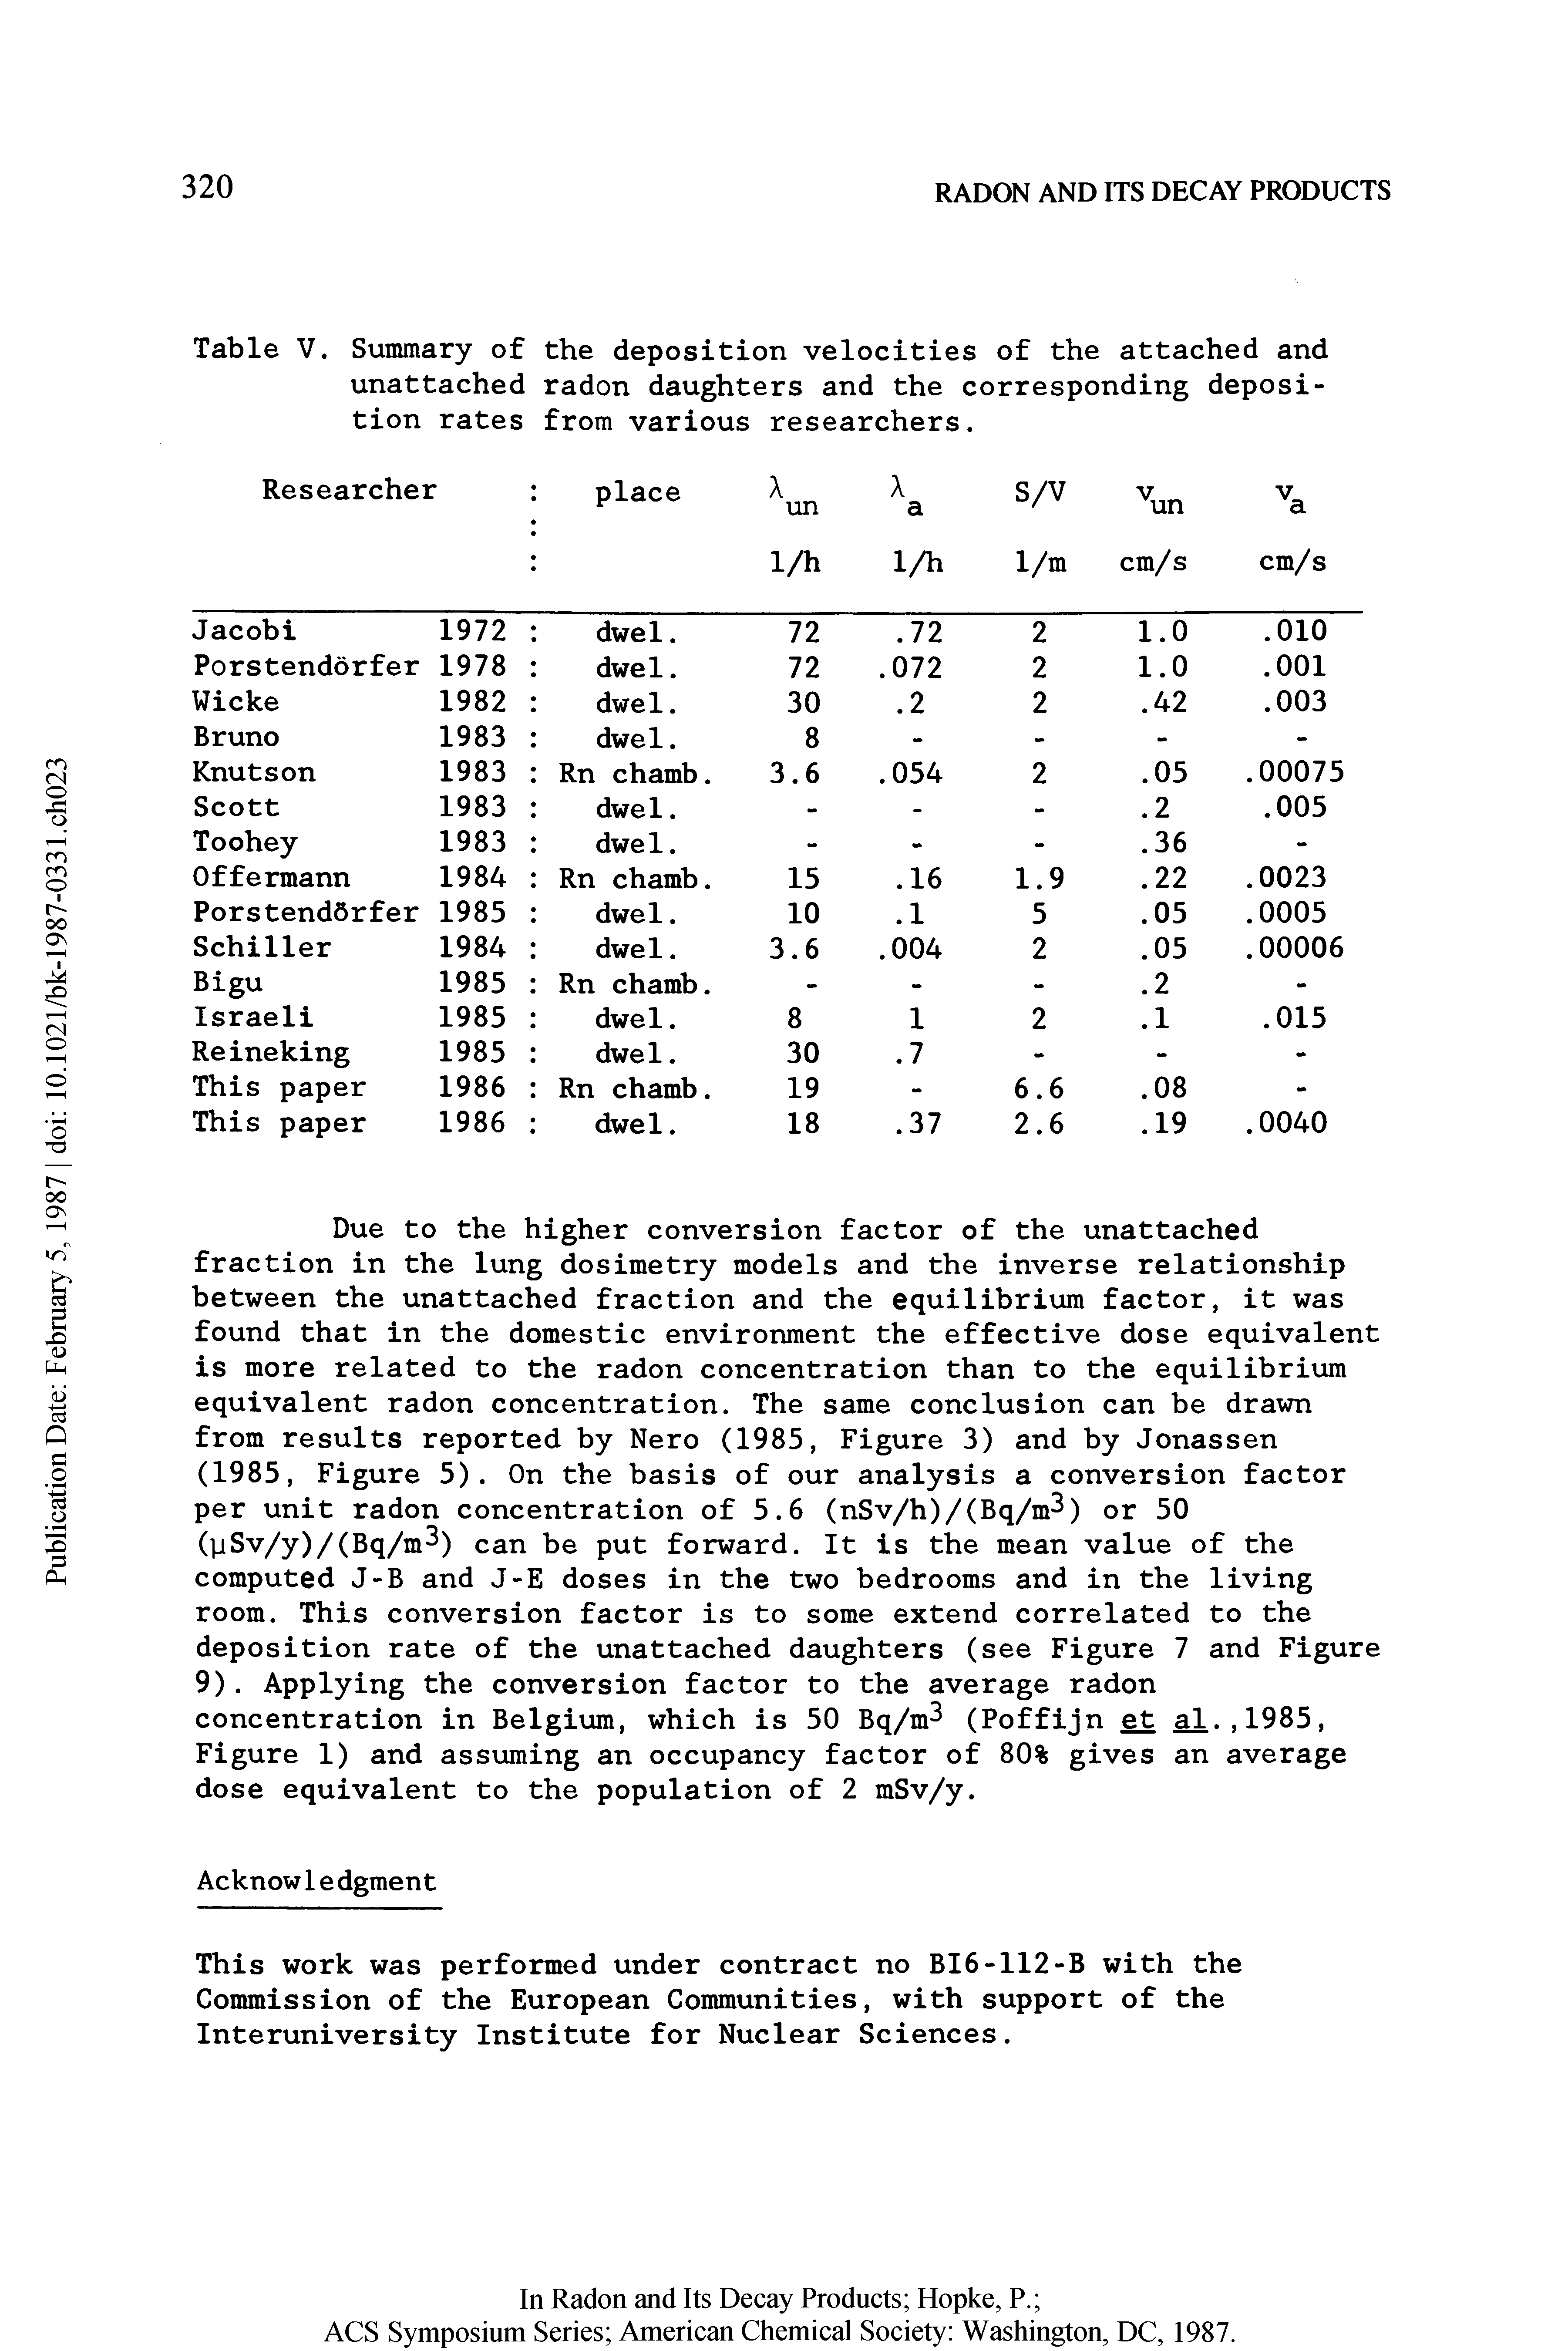 Table V. Summary of the deposition velocities of the attached and unattached radon daughters and the corresponding deposition rates from various researchers.